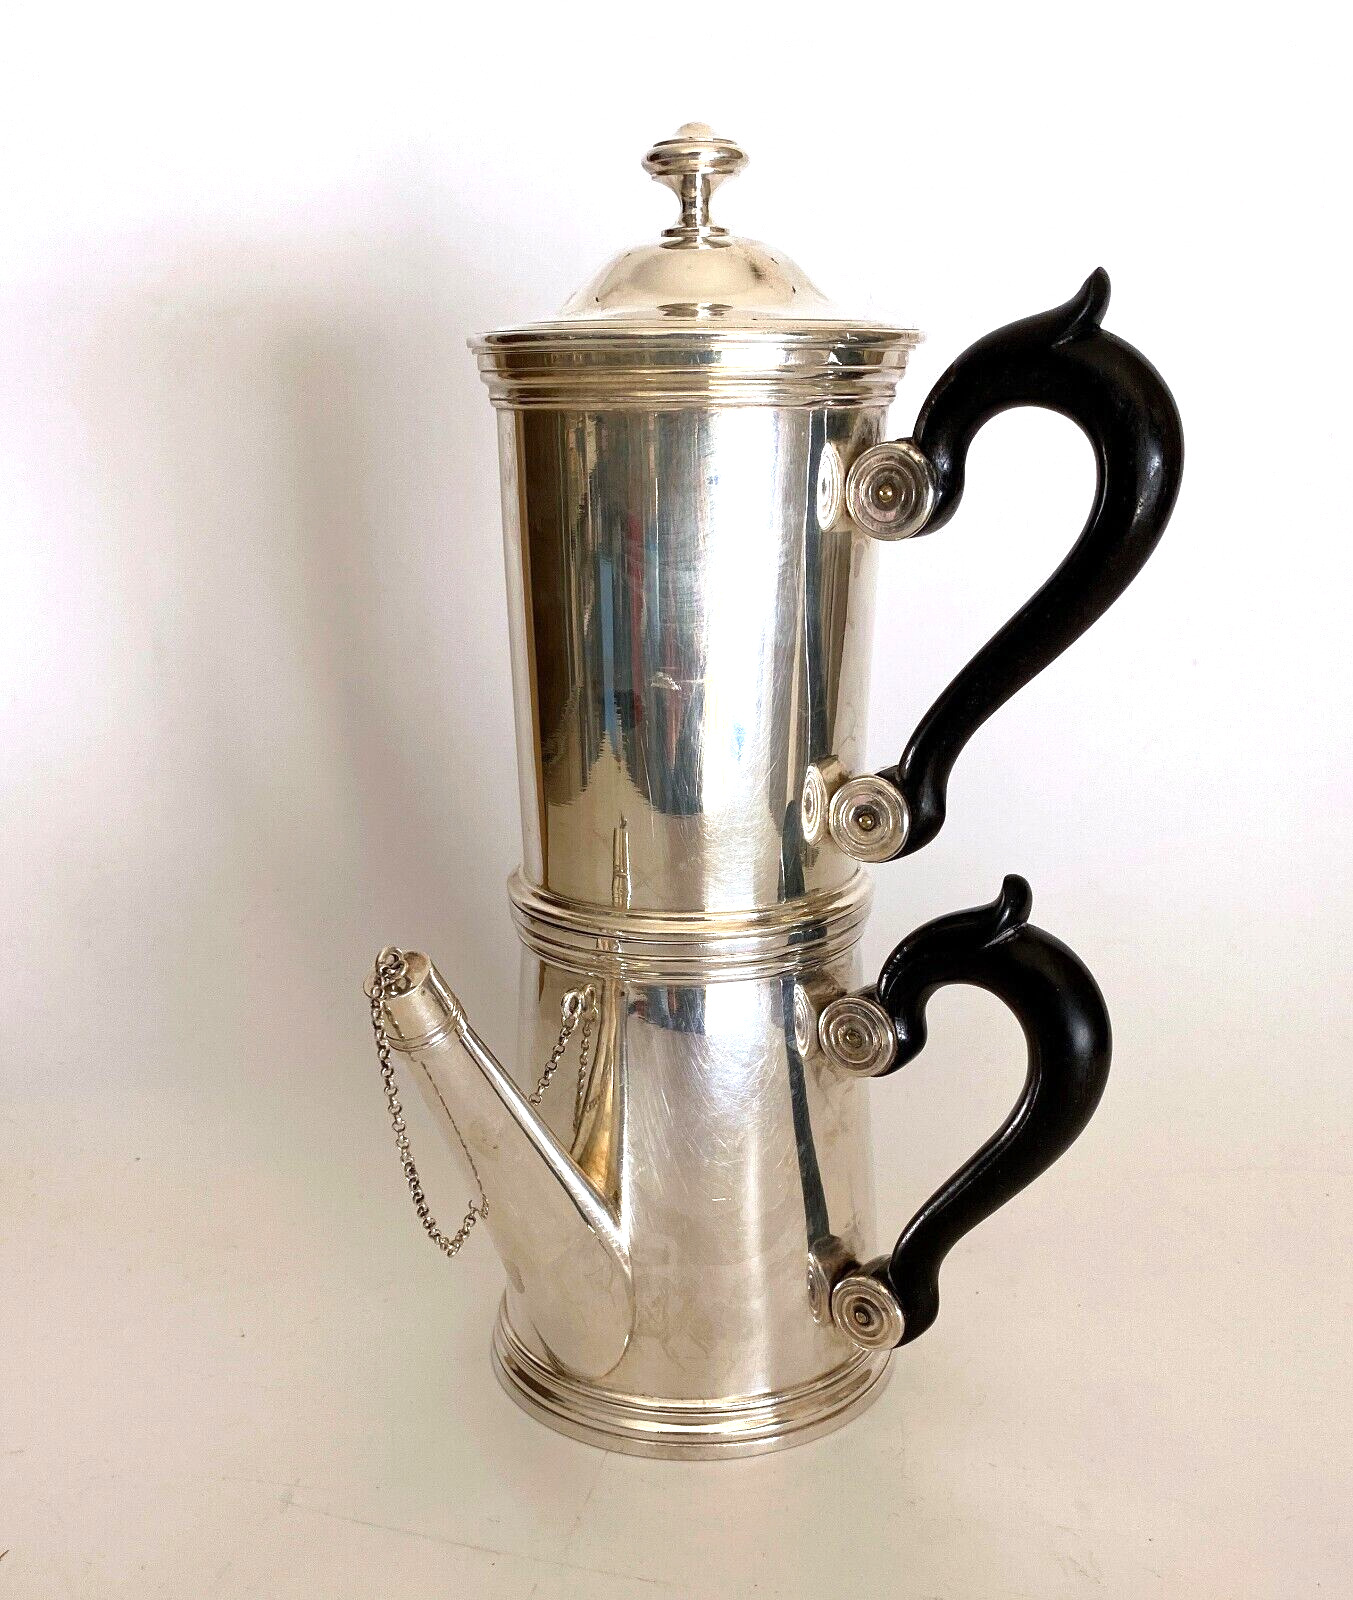 Rare Vintage Two-Part Coffee Maker by Christofle